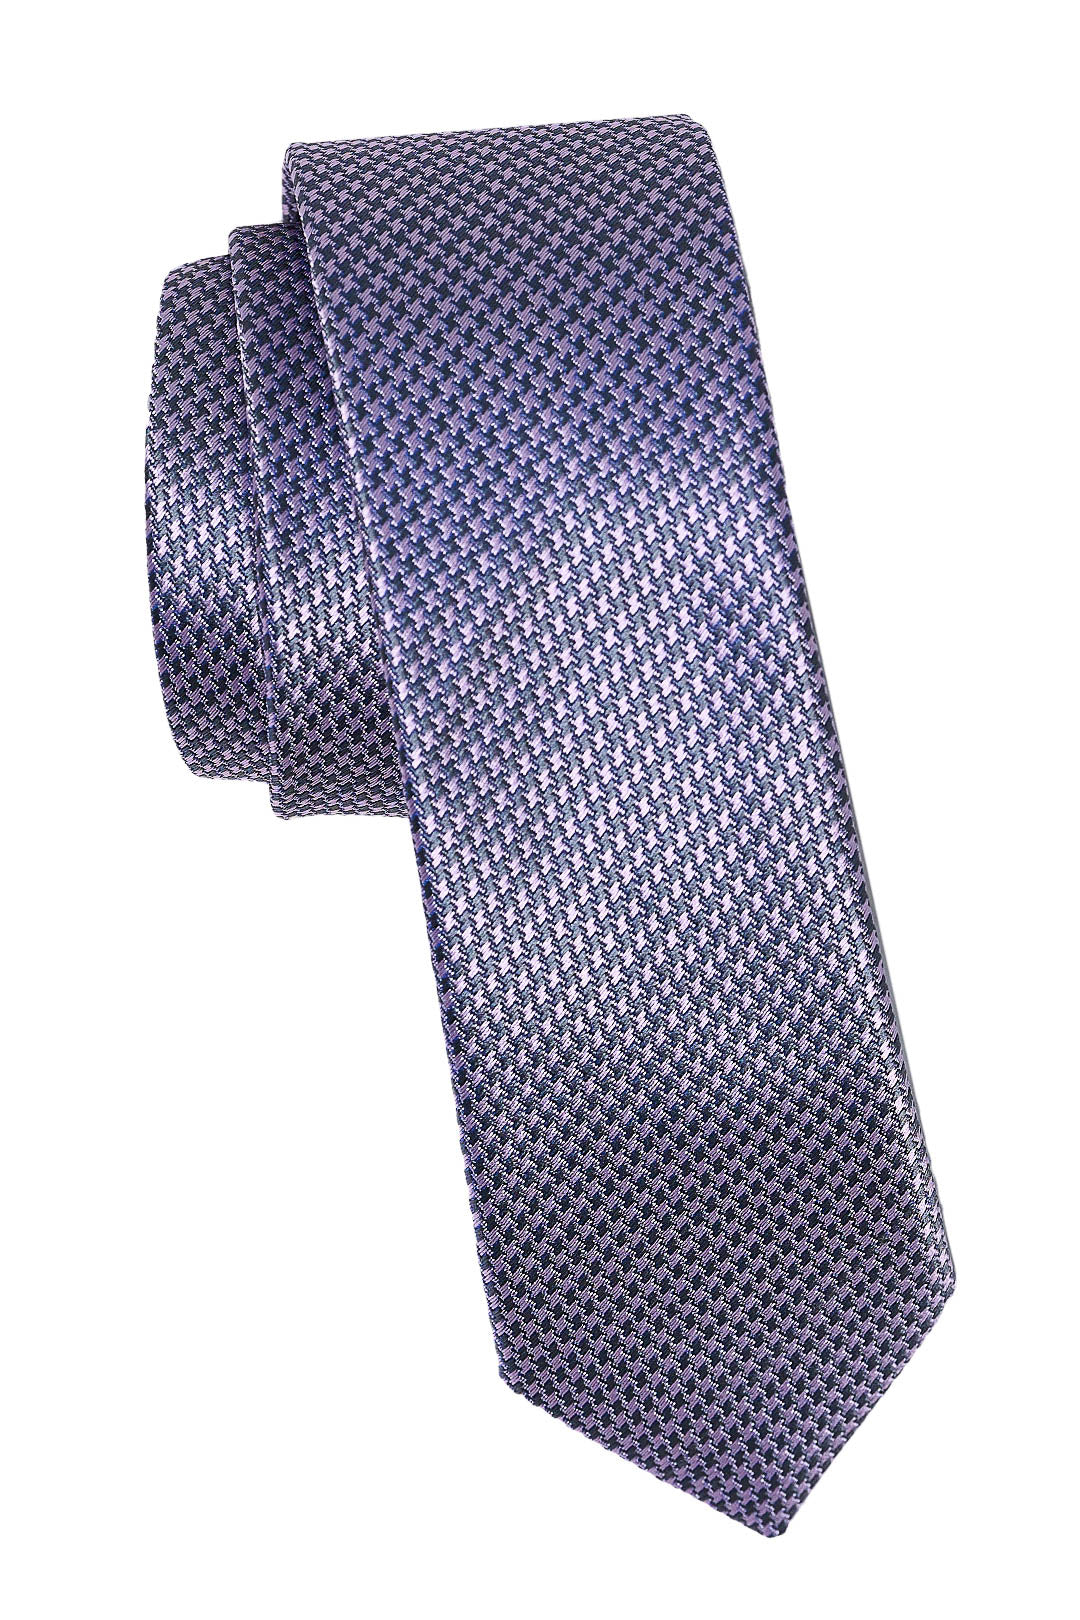 "Lilac" Patterned Tie